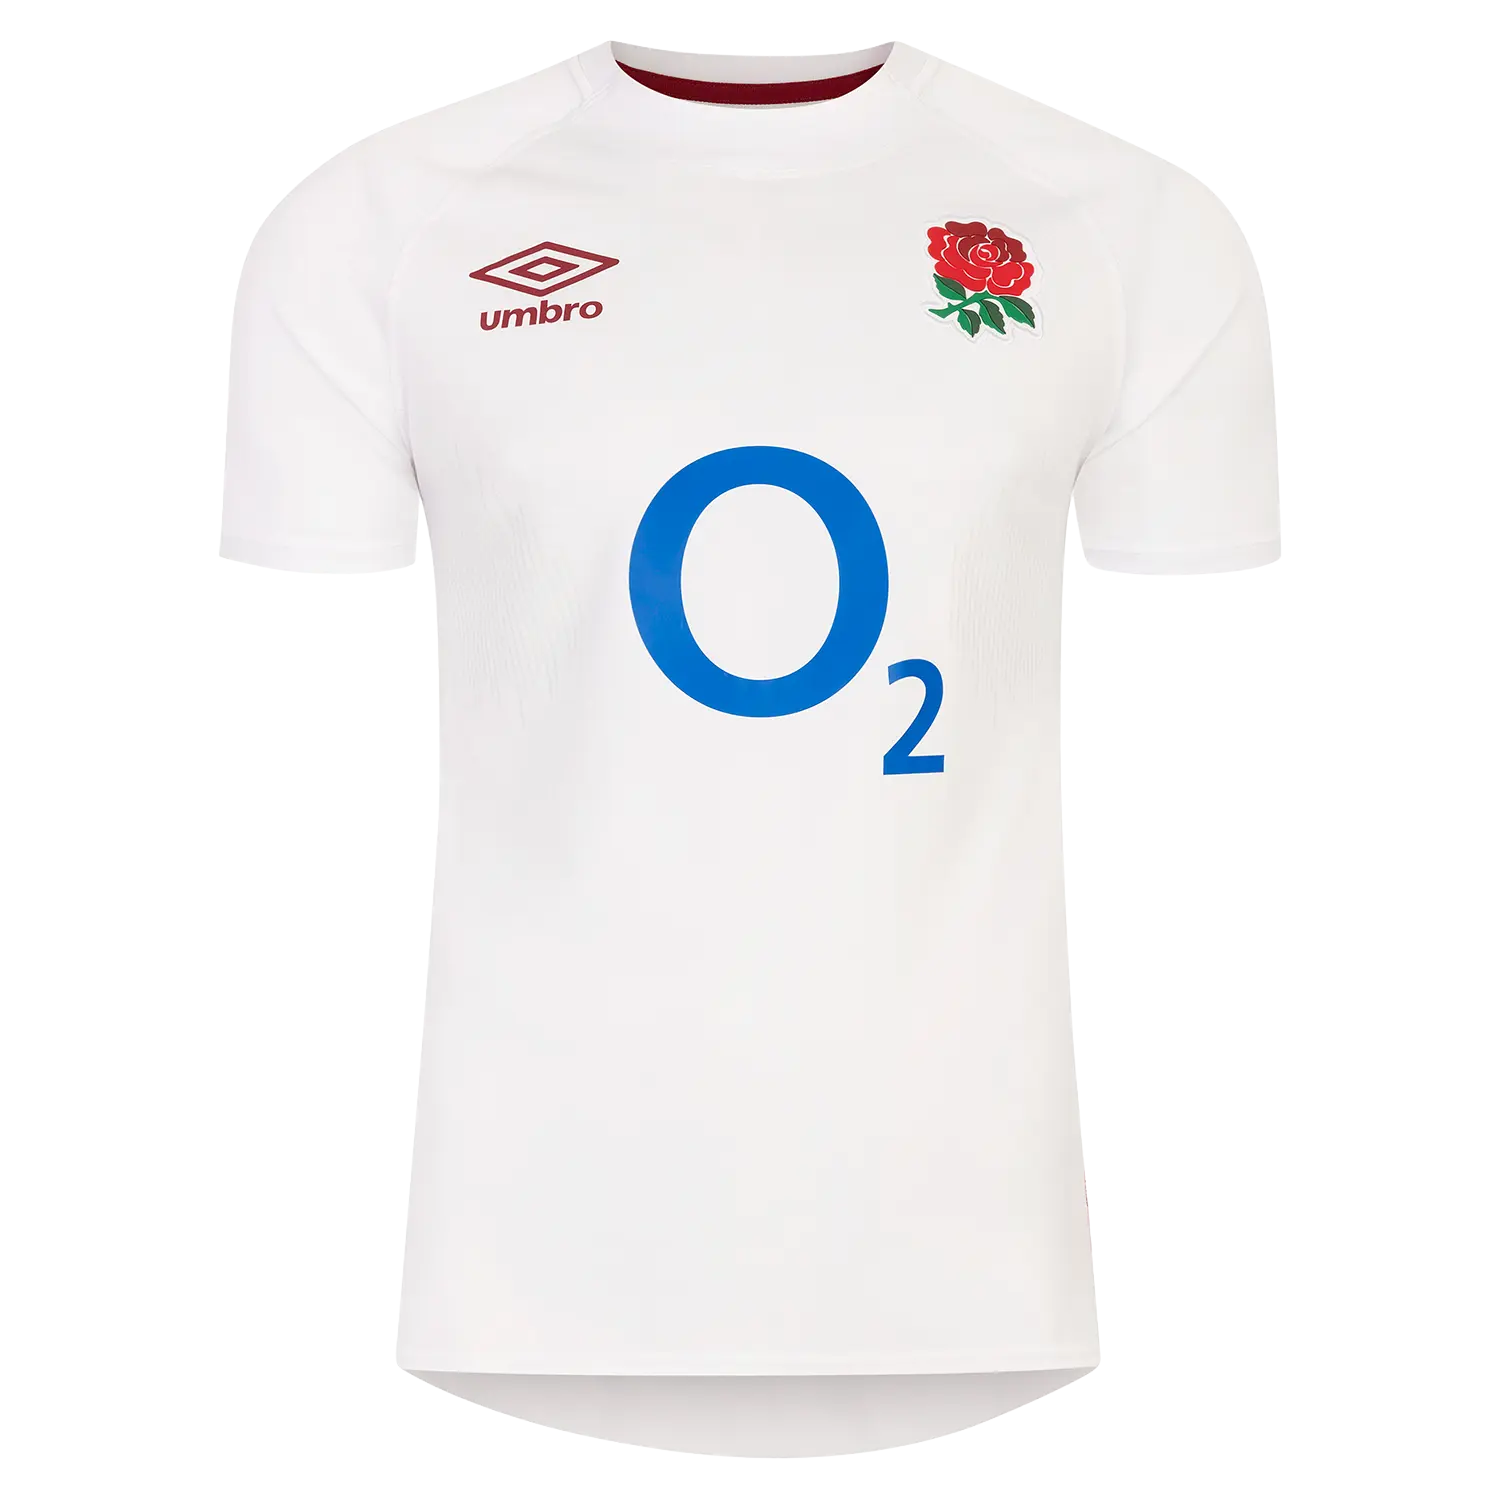 Umbro England Rugby Home Replica Jersey Short-Sleeved Top